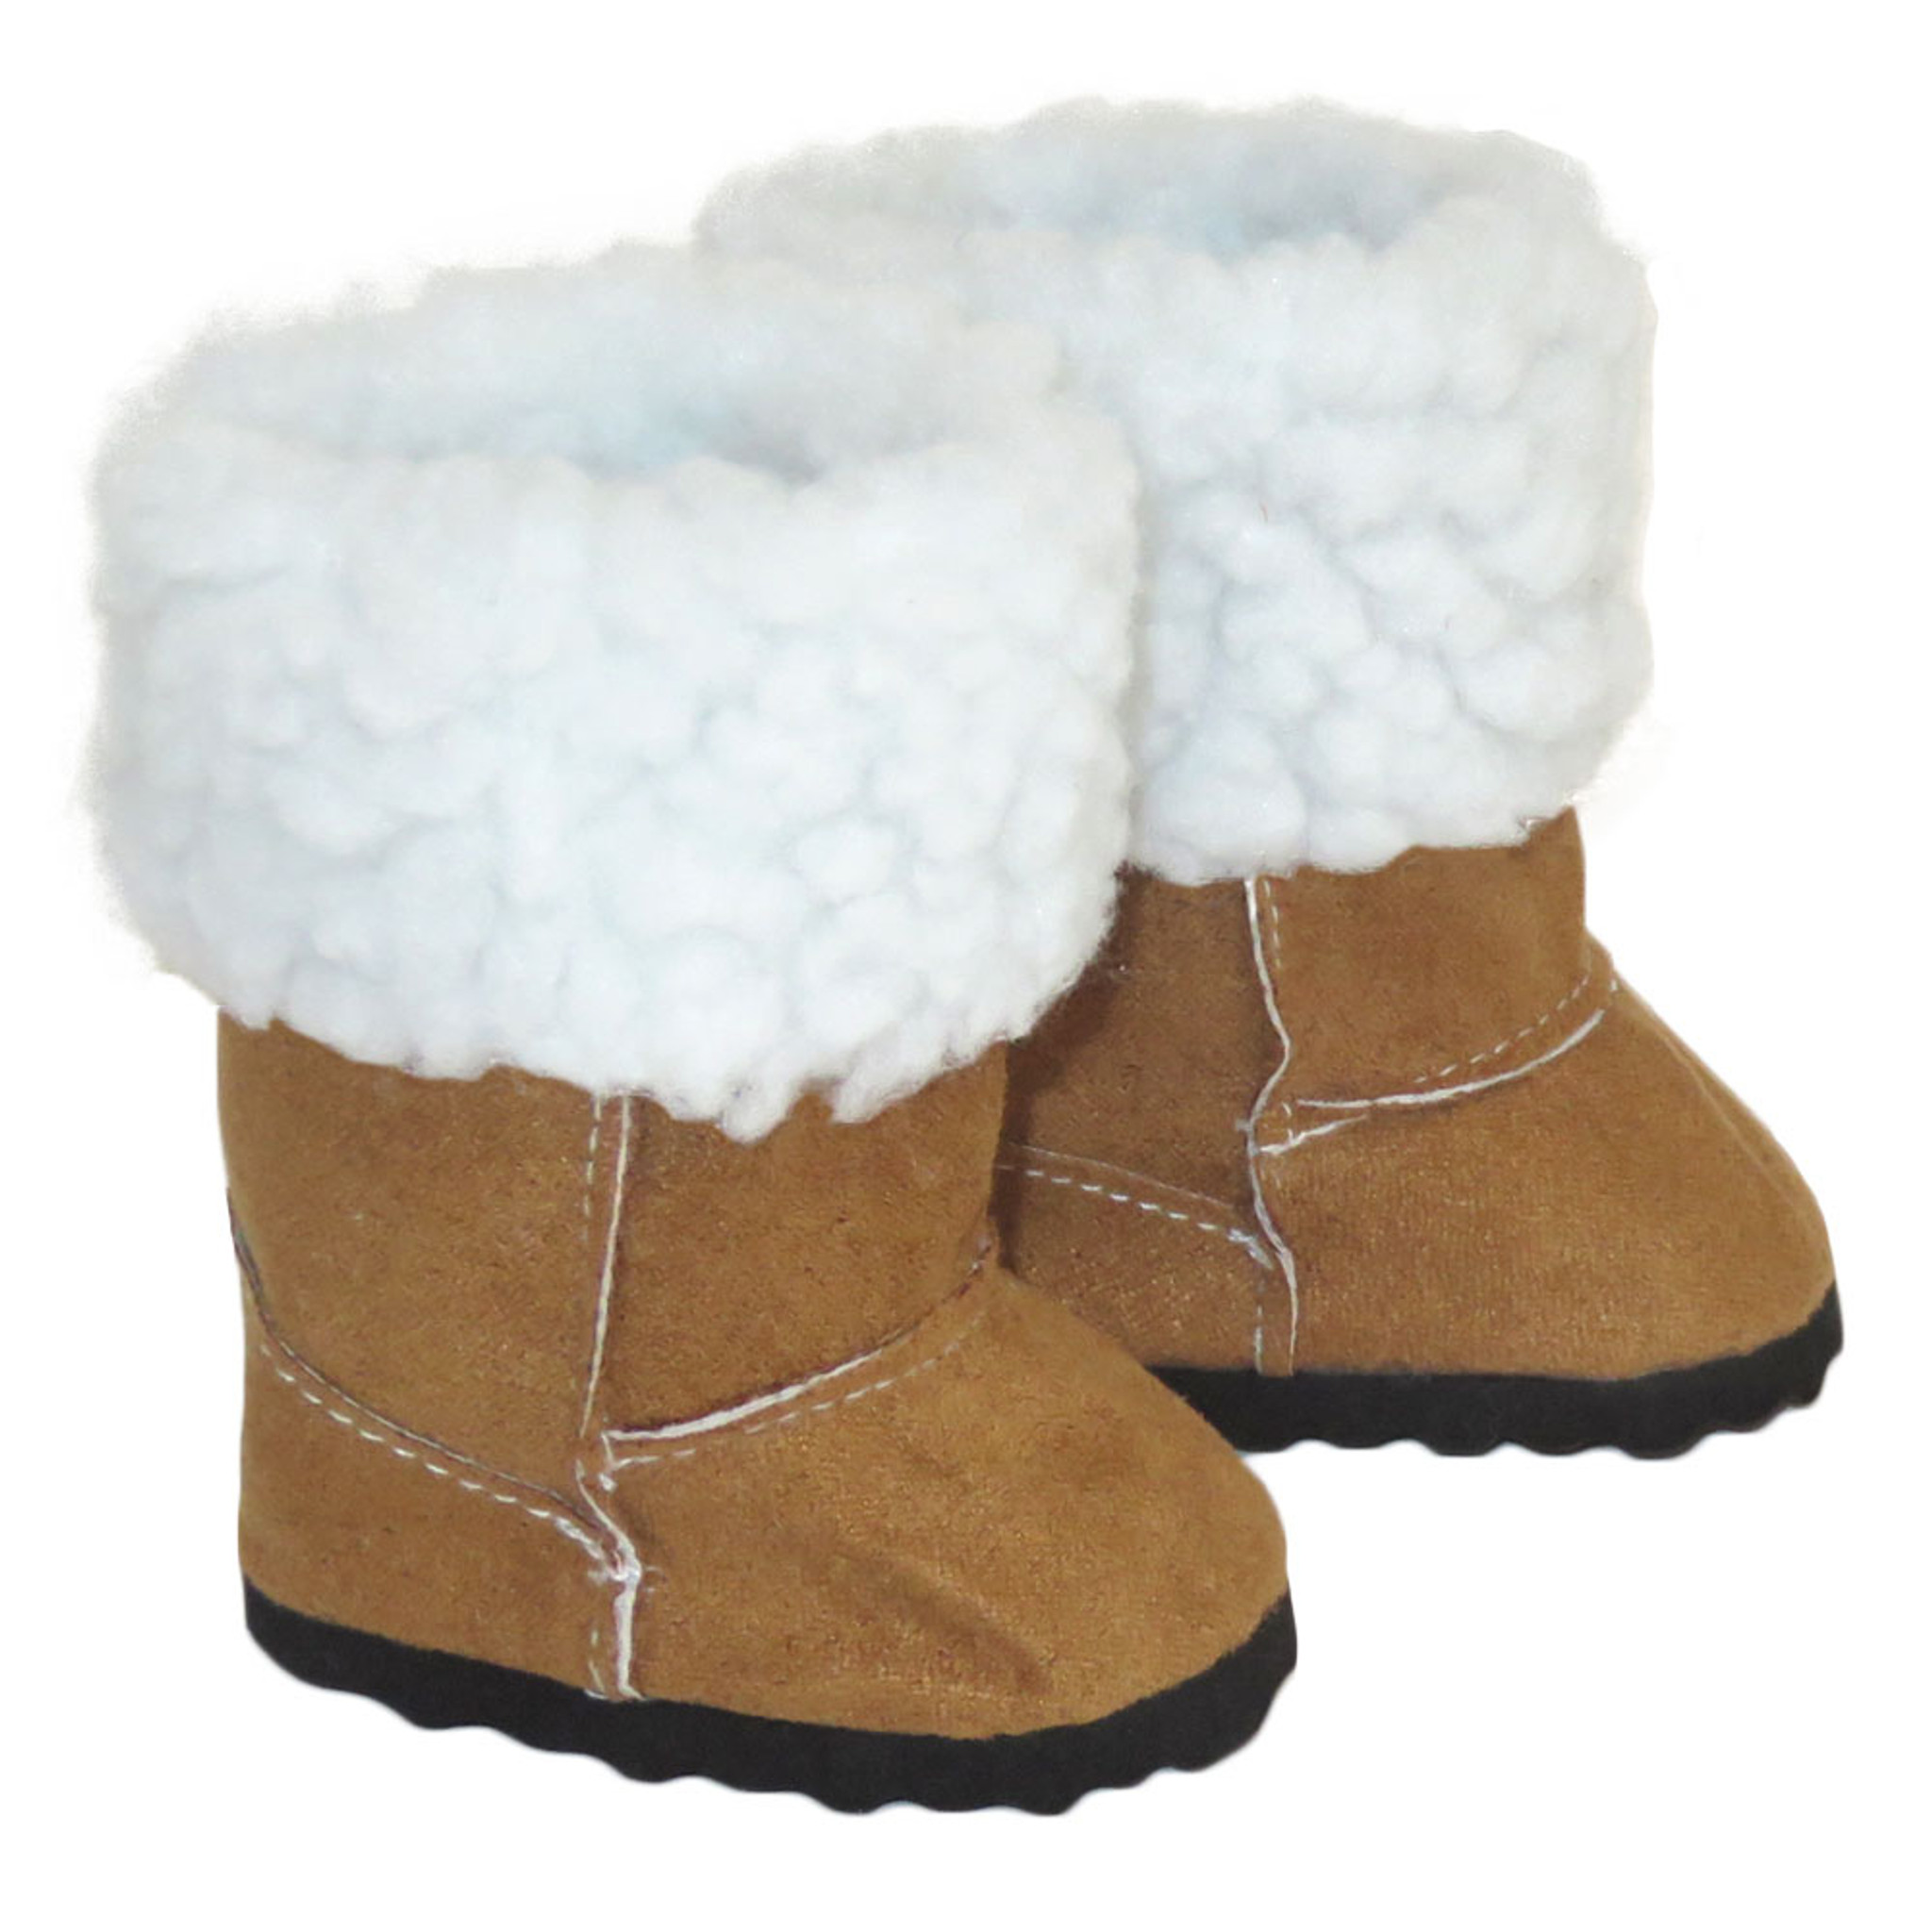 K17. Camel brown boots with white fur trim for 18 dolls. - Silly Monkey